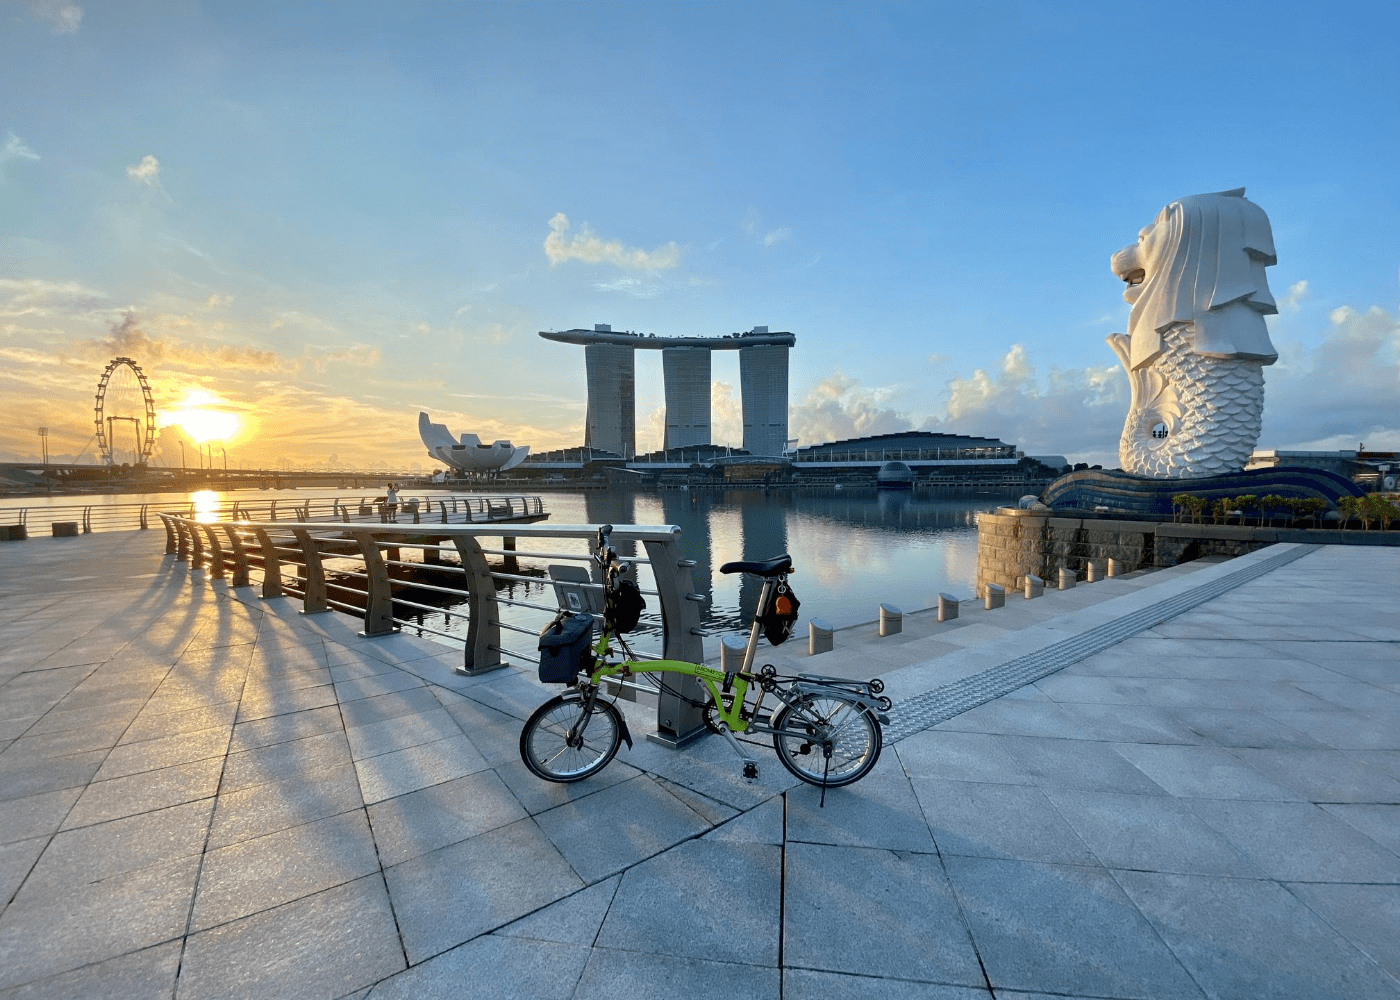 Best places you can visit when in Singapore